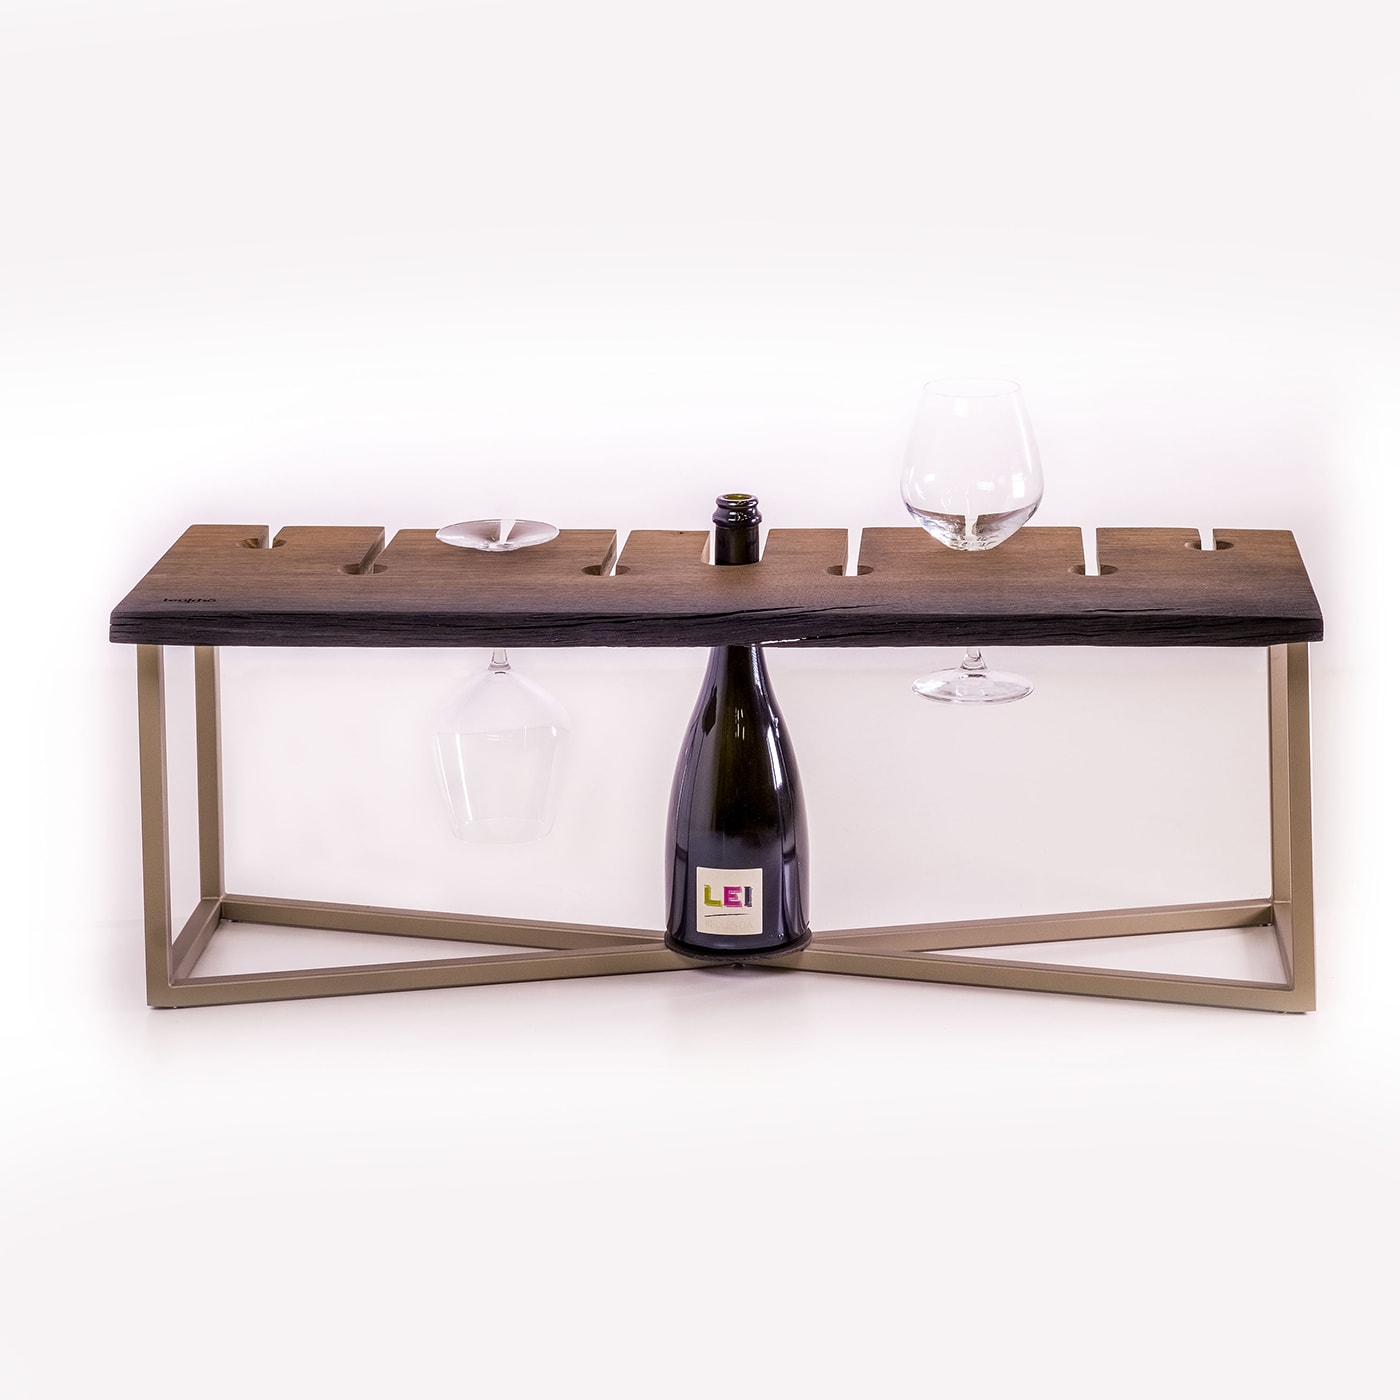 Bottle and Glasses Serving Tray - Teukho